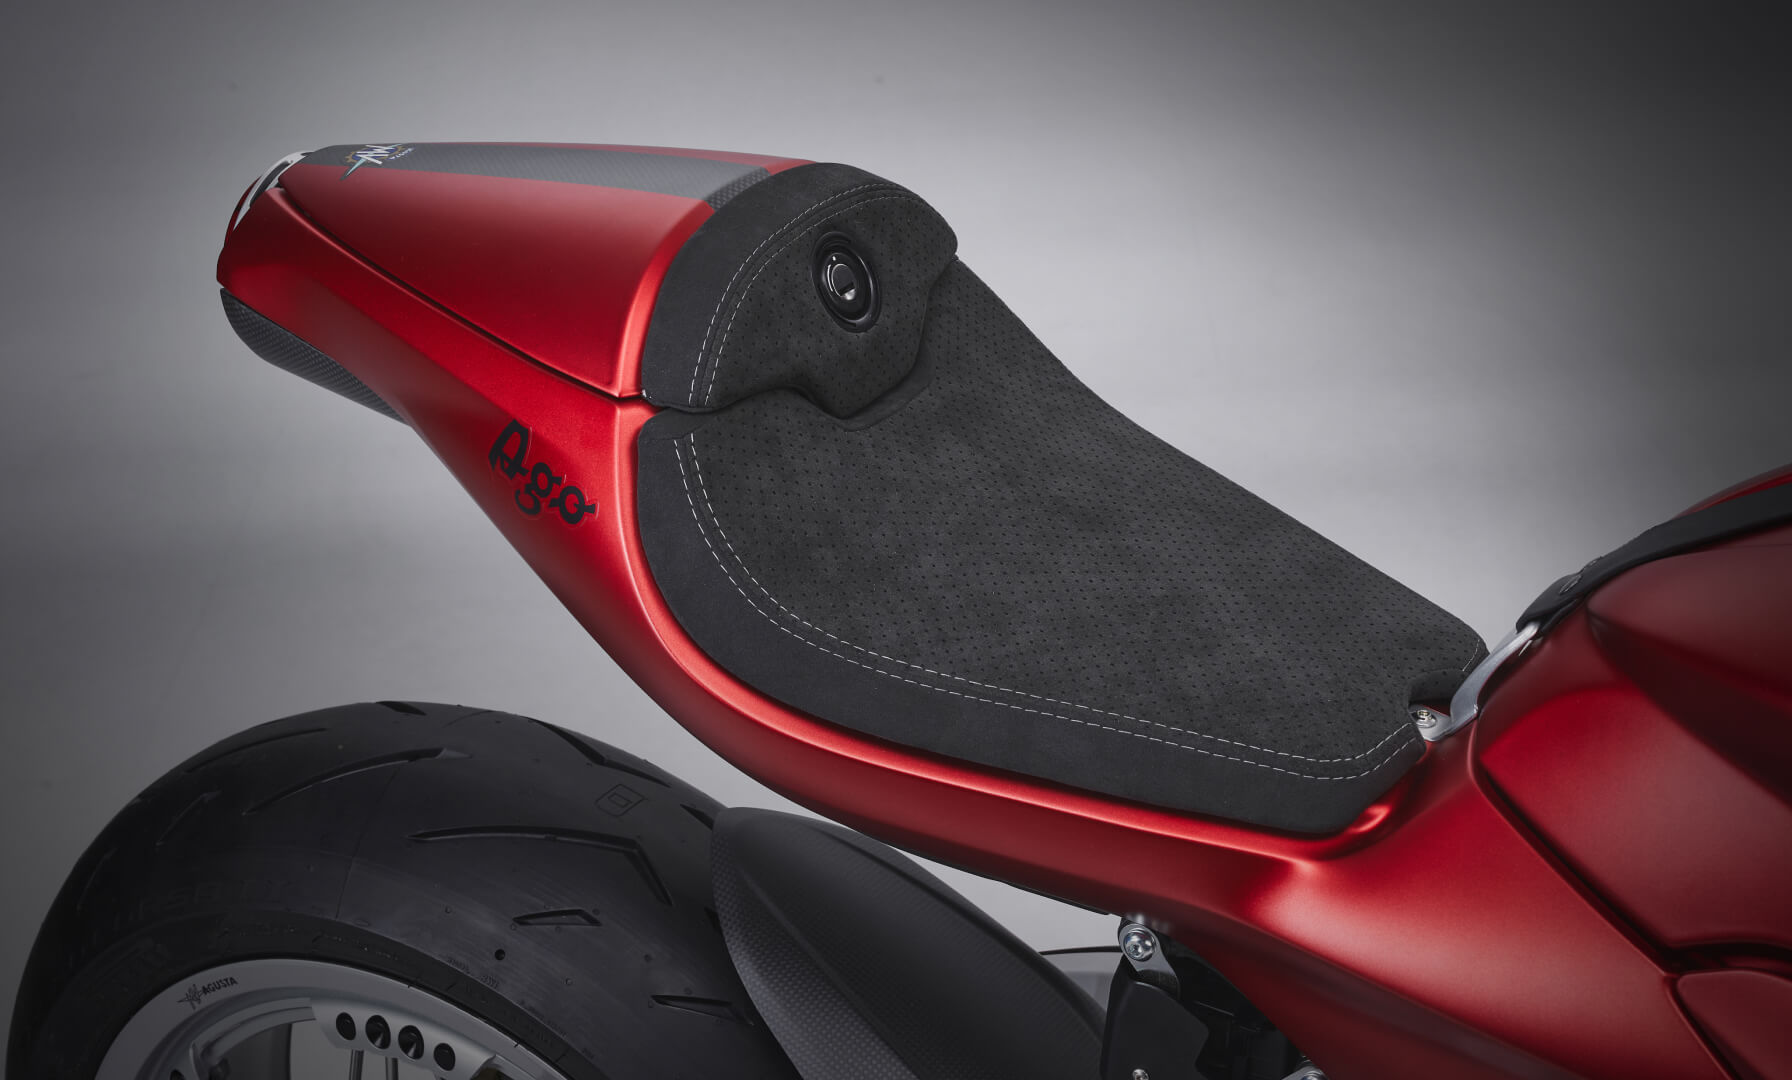 A view of the seat for the new Special Edition Superveloce Ago created in commemoration of Giacomo Agostini